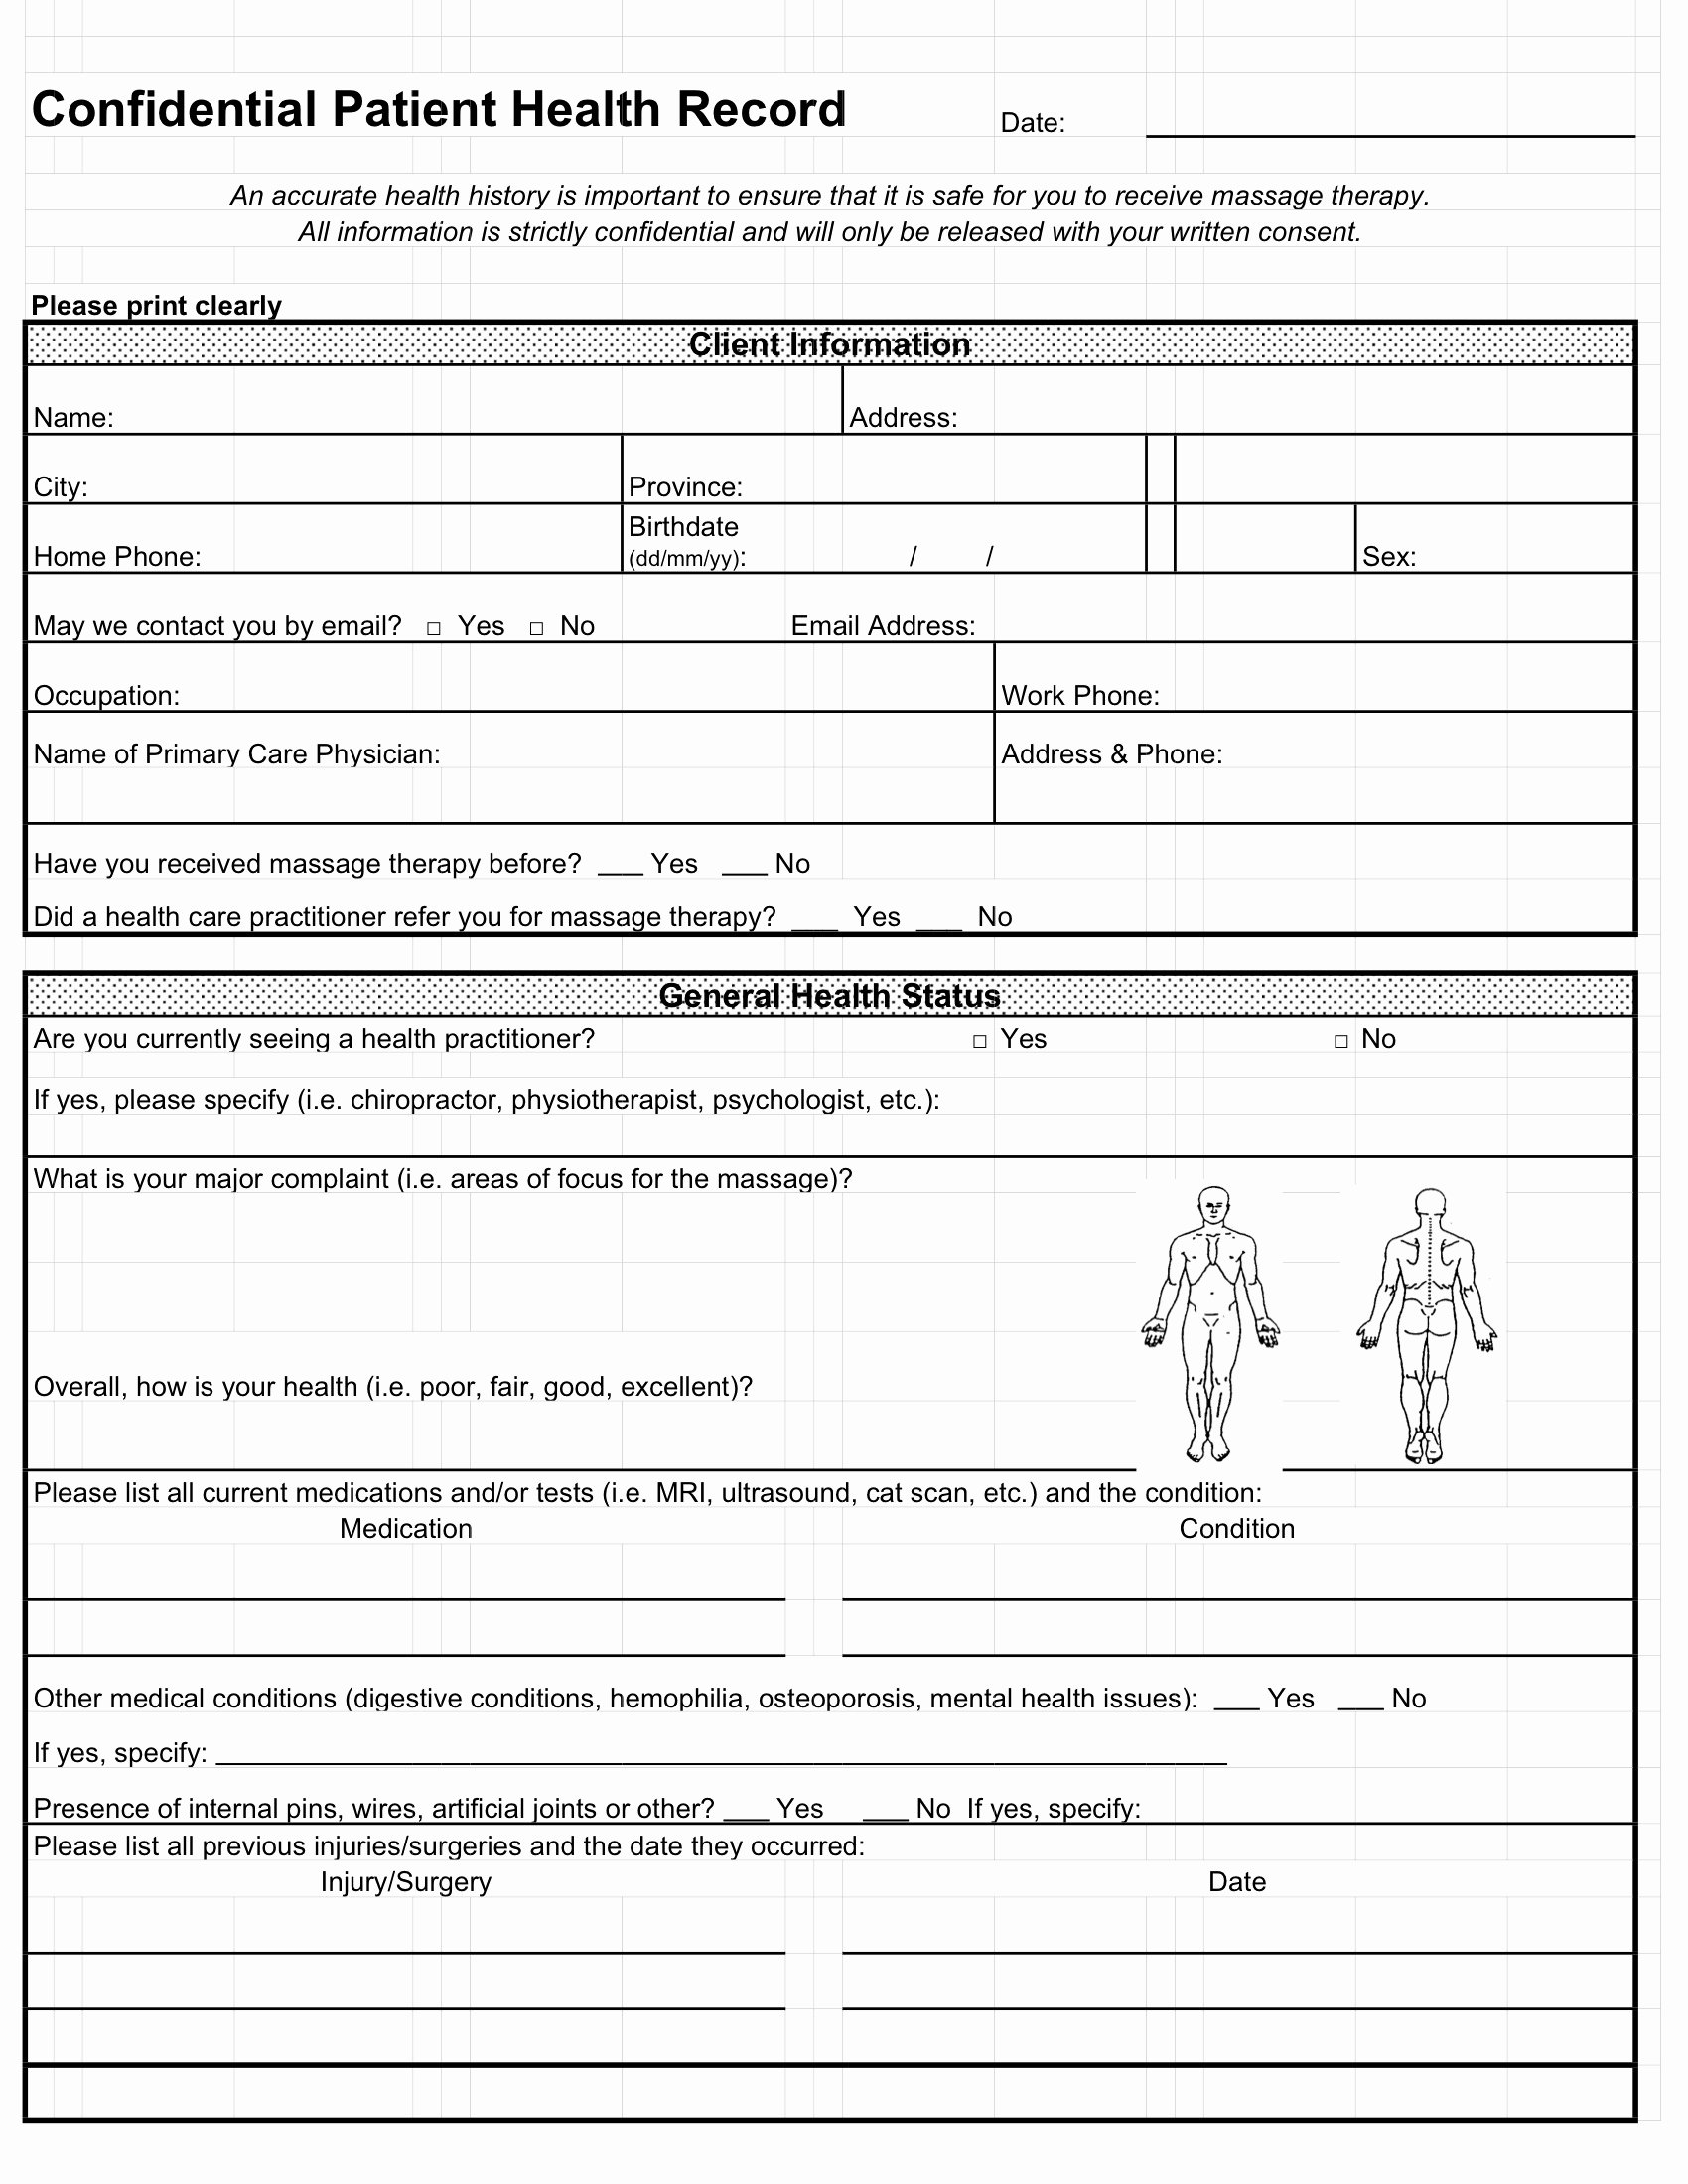 Free Medical History Questionnaire Template Awesome Download Free Medical History Questionnaire Template Free